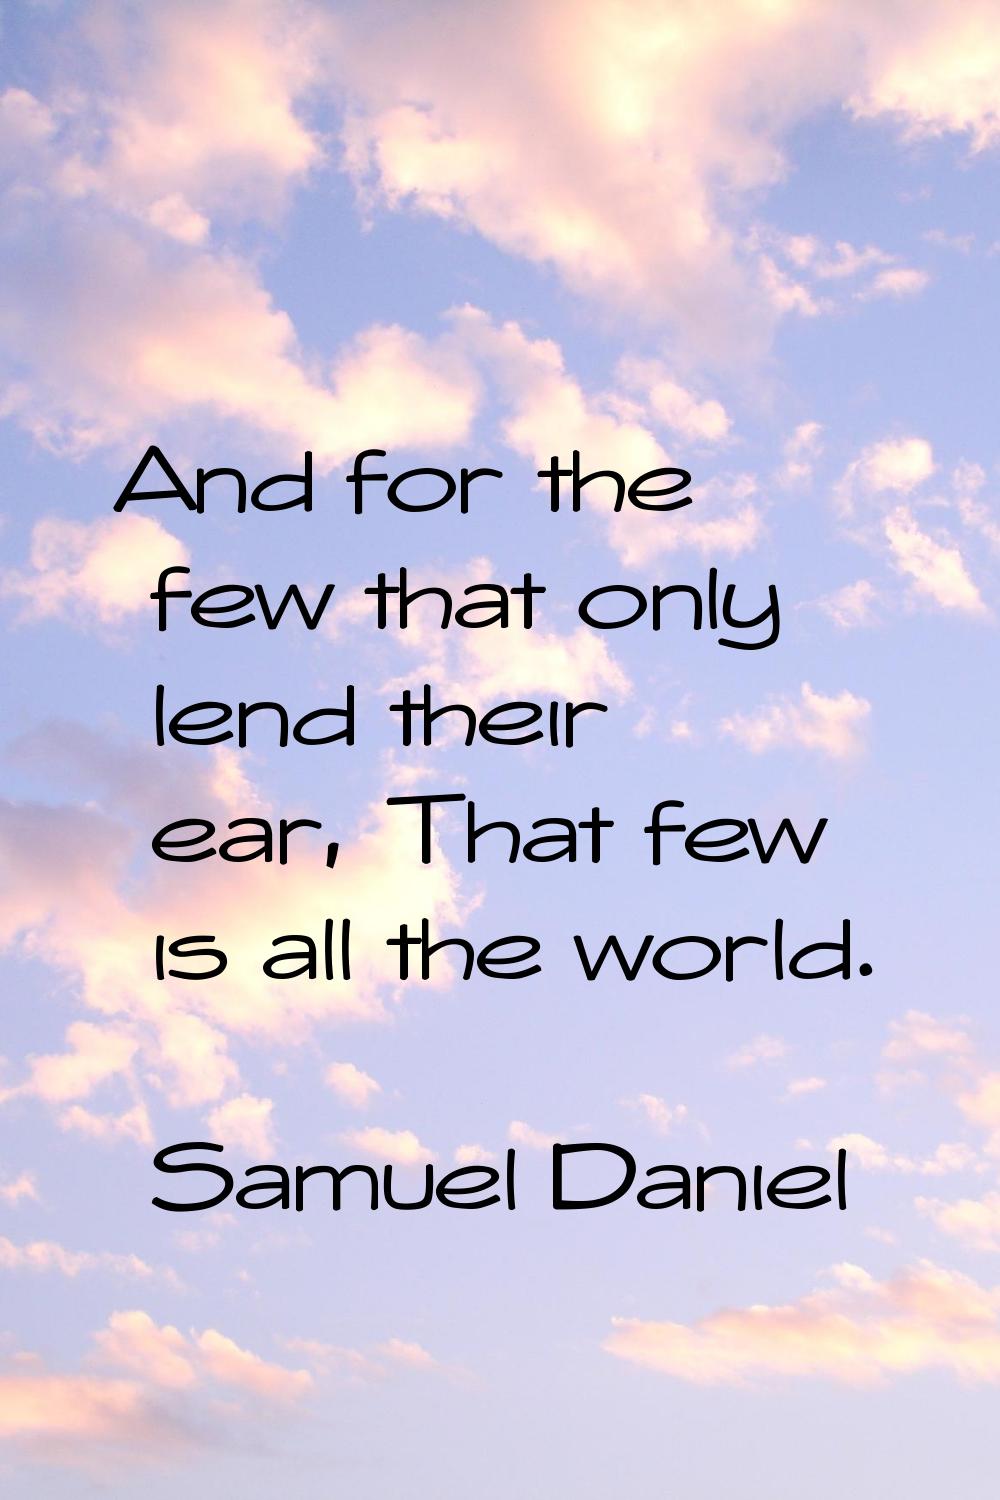 And for the few that only lend their ear, That few is all the world.